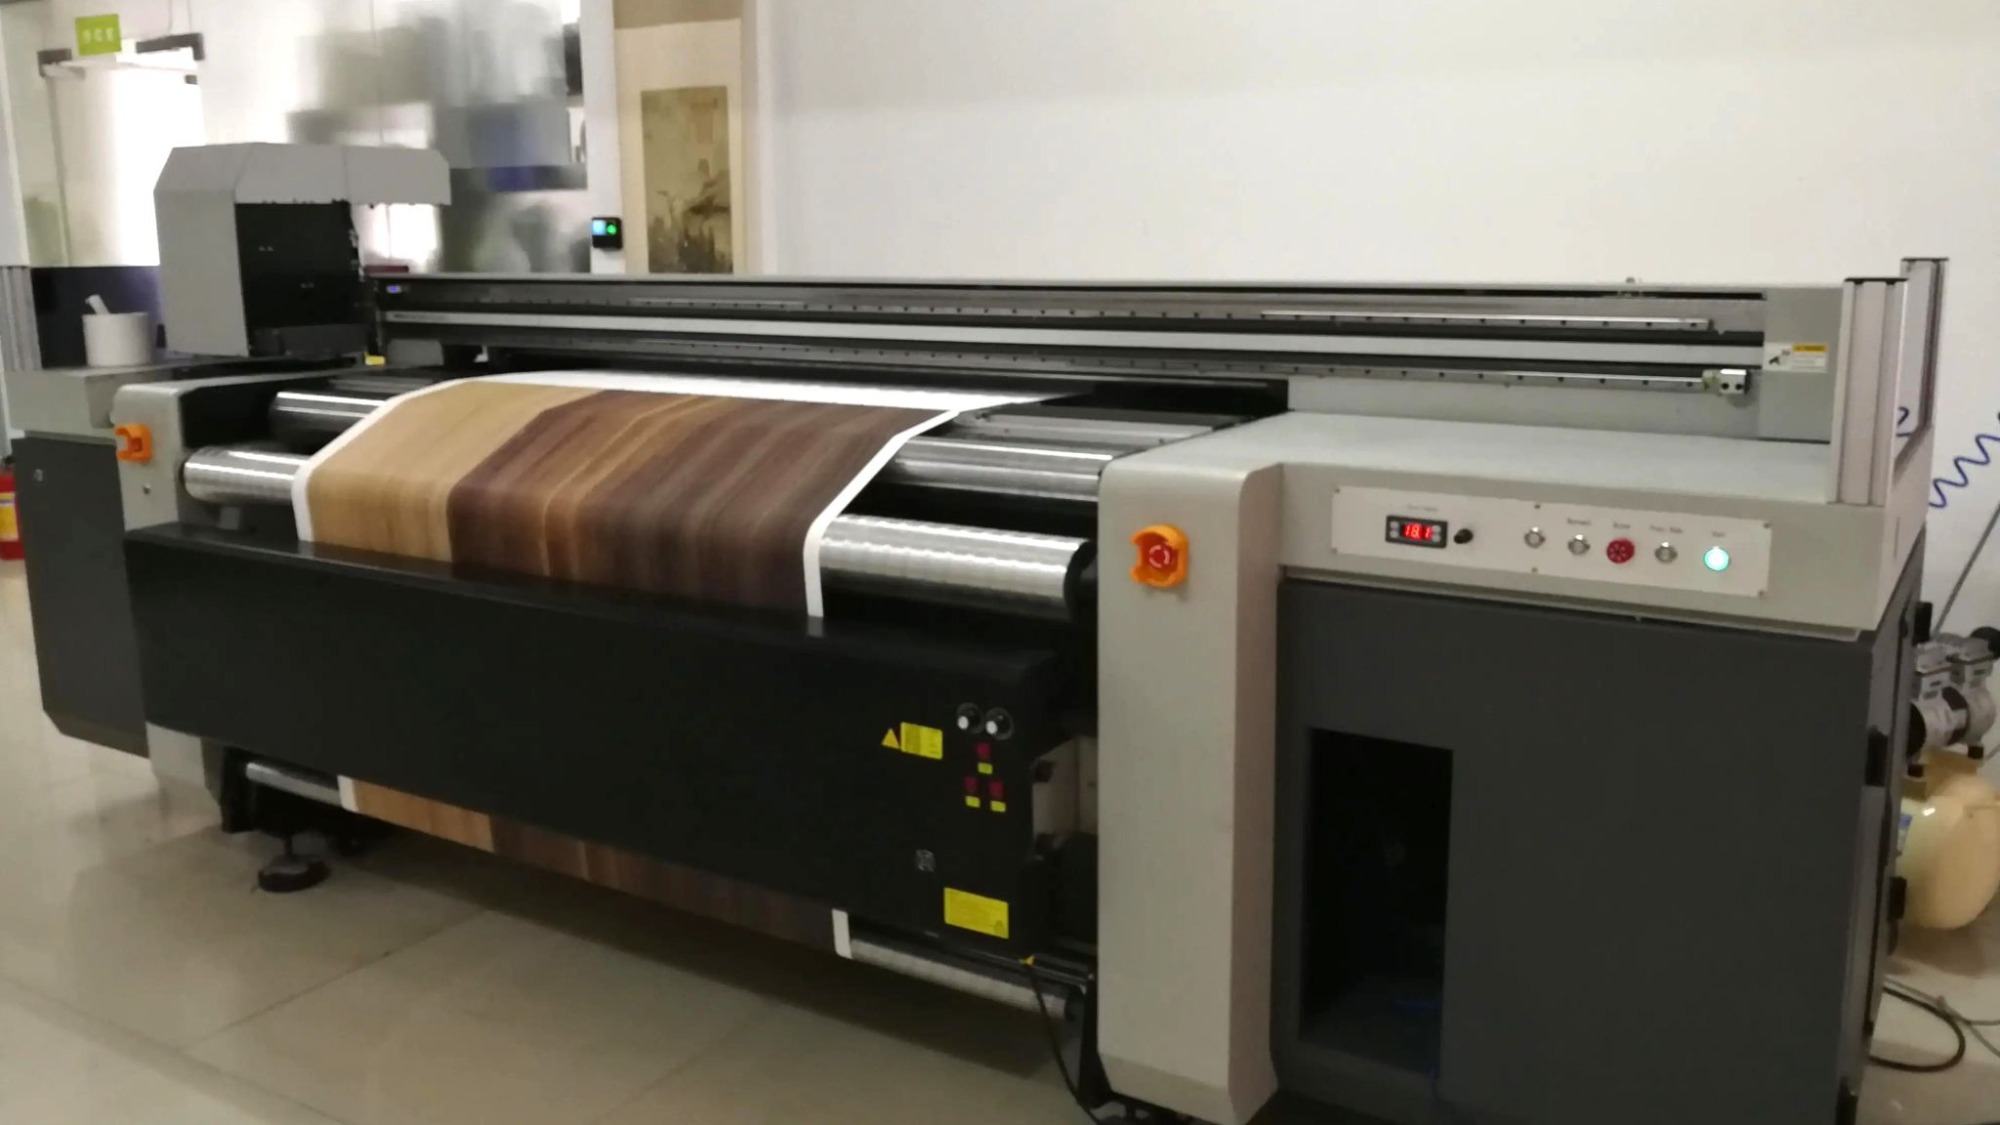 The application of Digital Printing Technology to the field of decorative paper